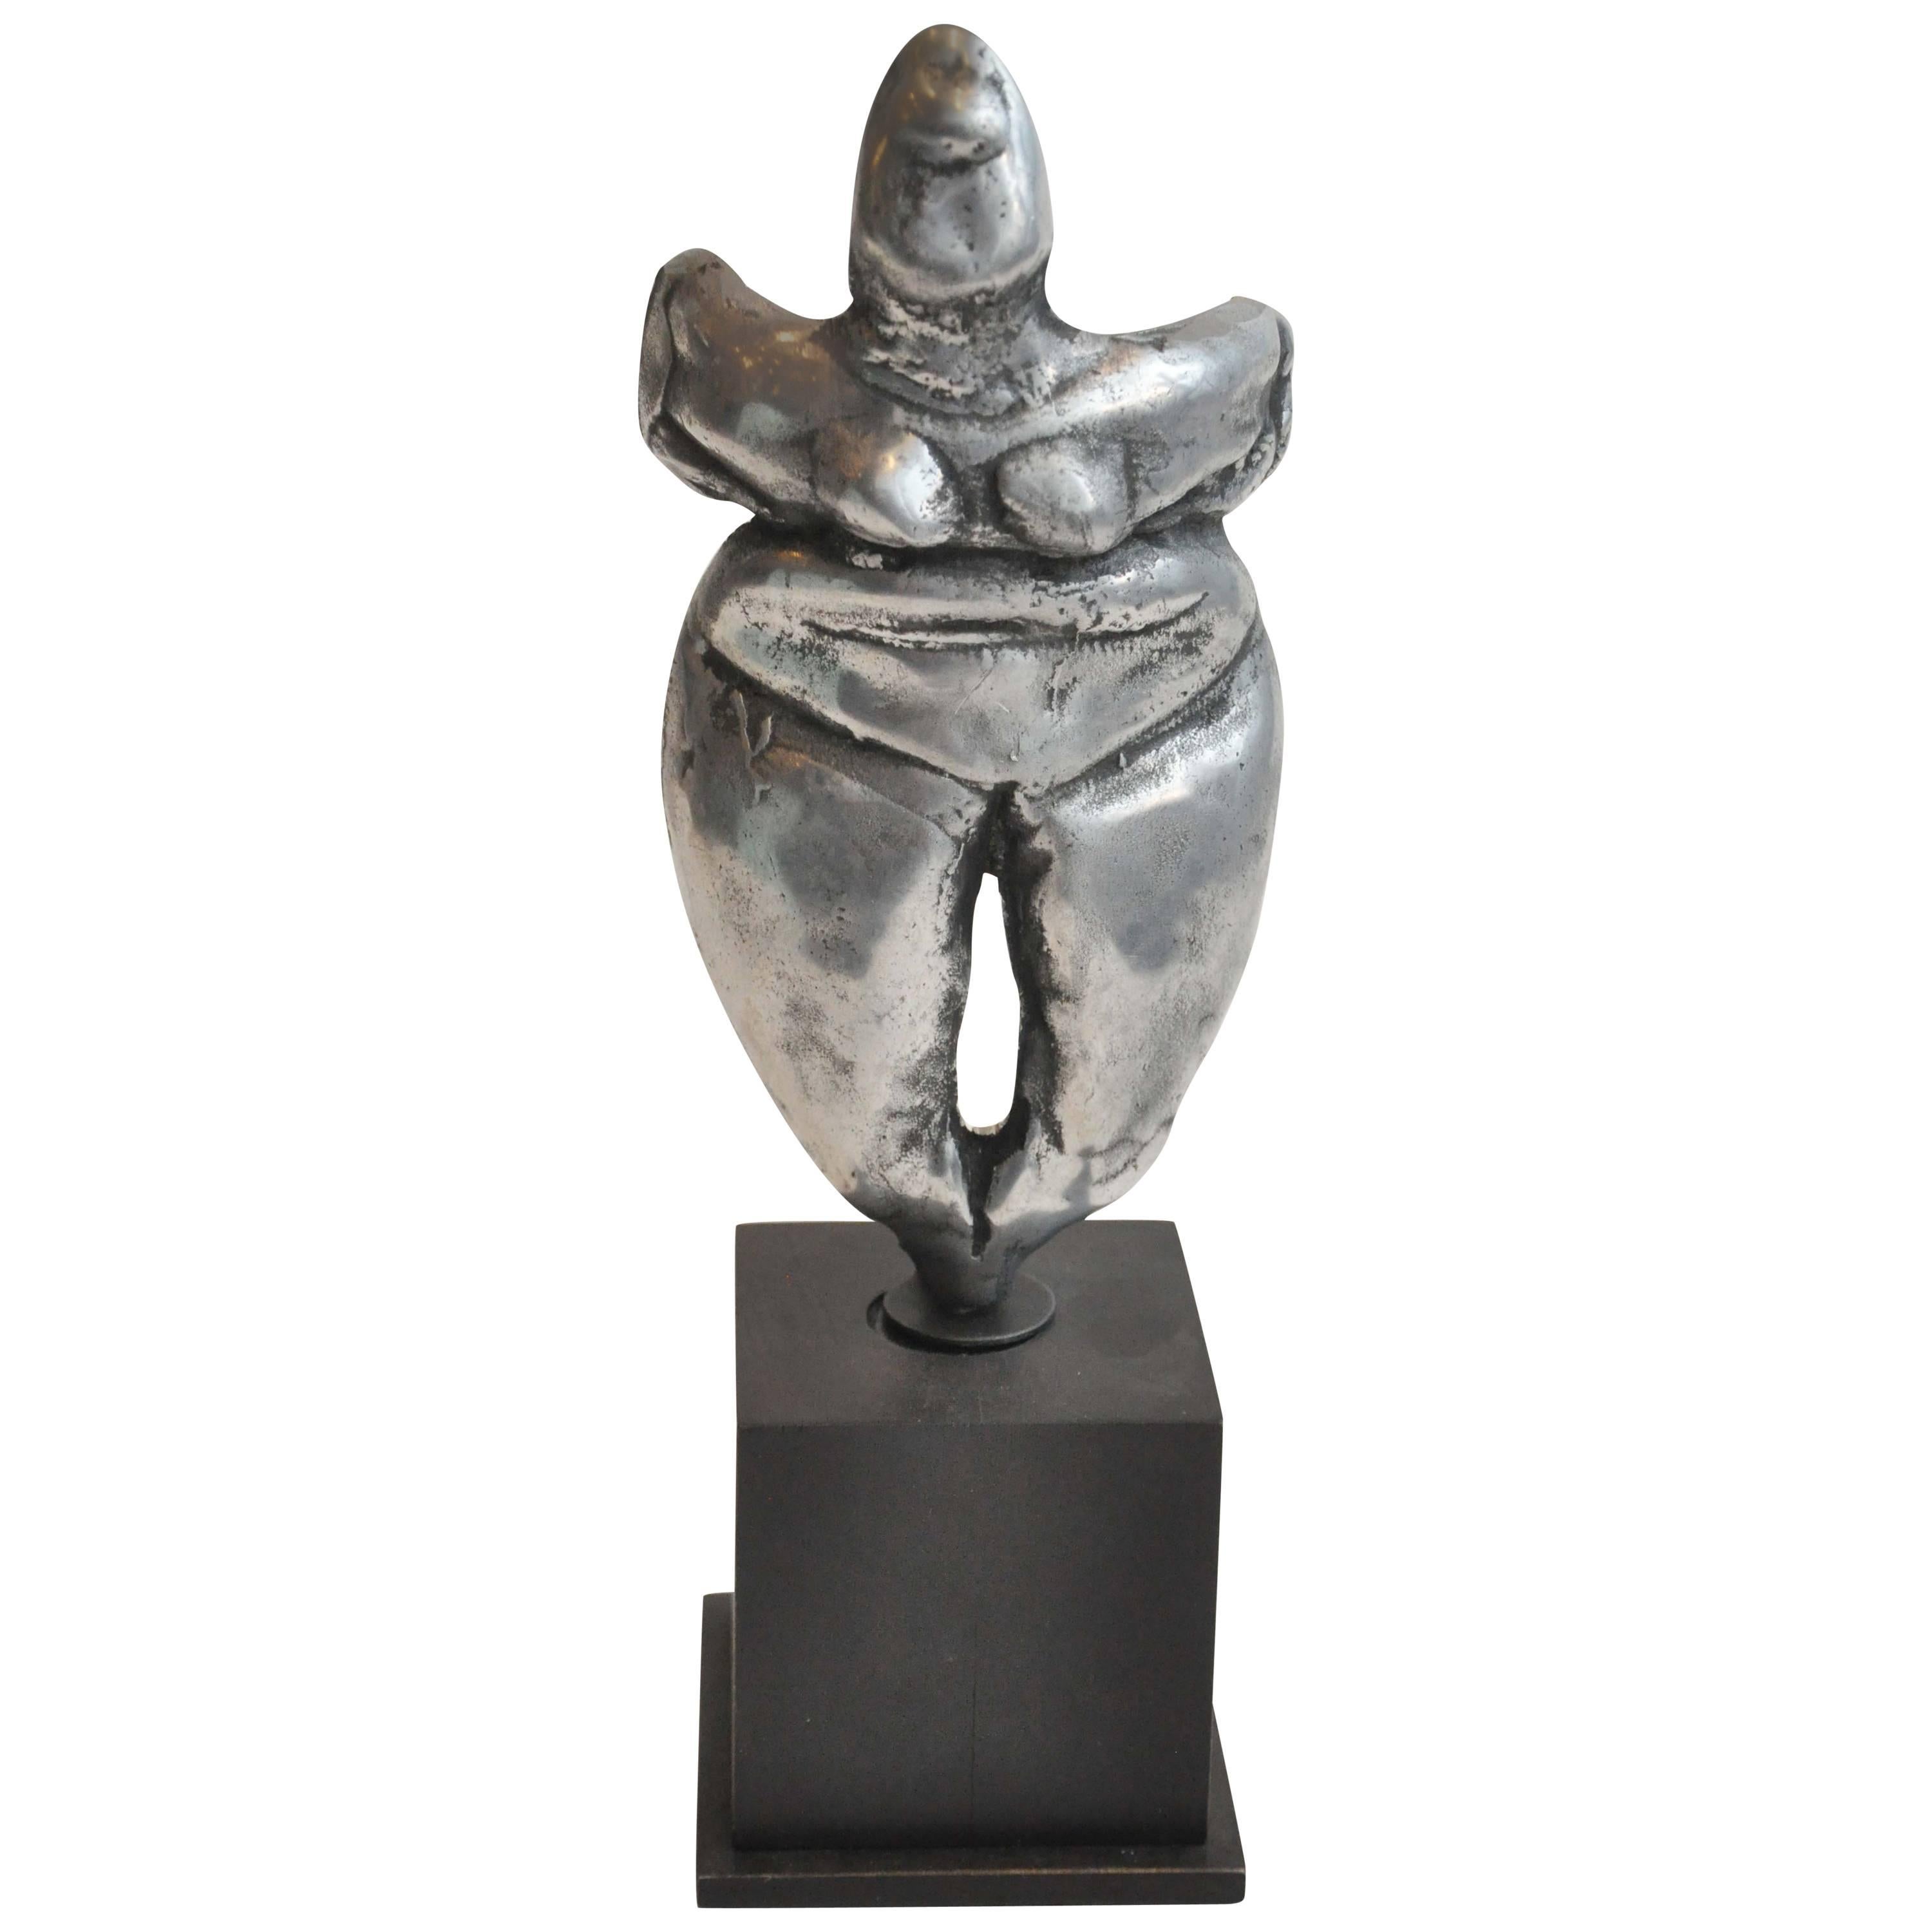 Early 20th Century Small Figural Studio Sculpture in Silver Metal from Uruguay For Sale